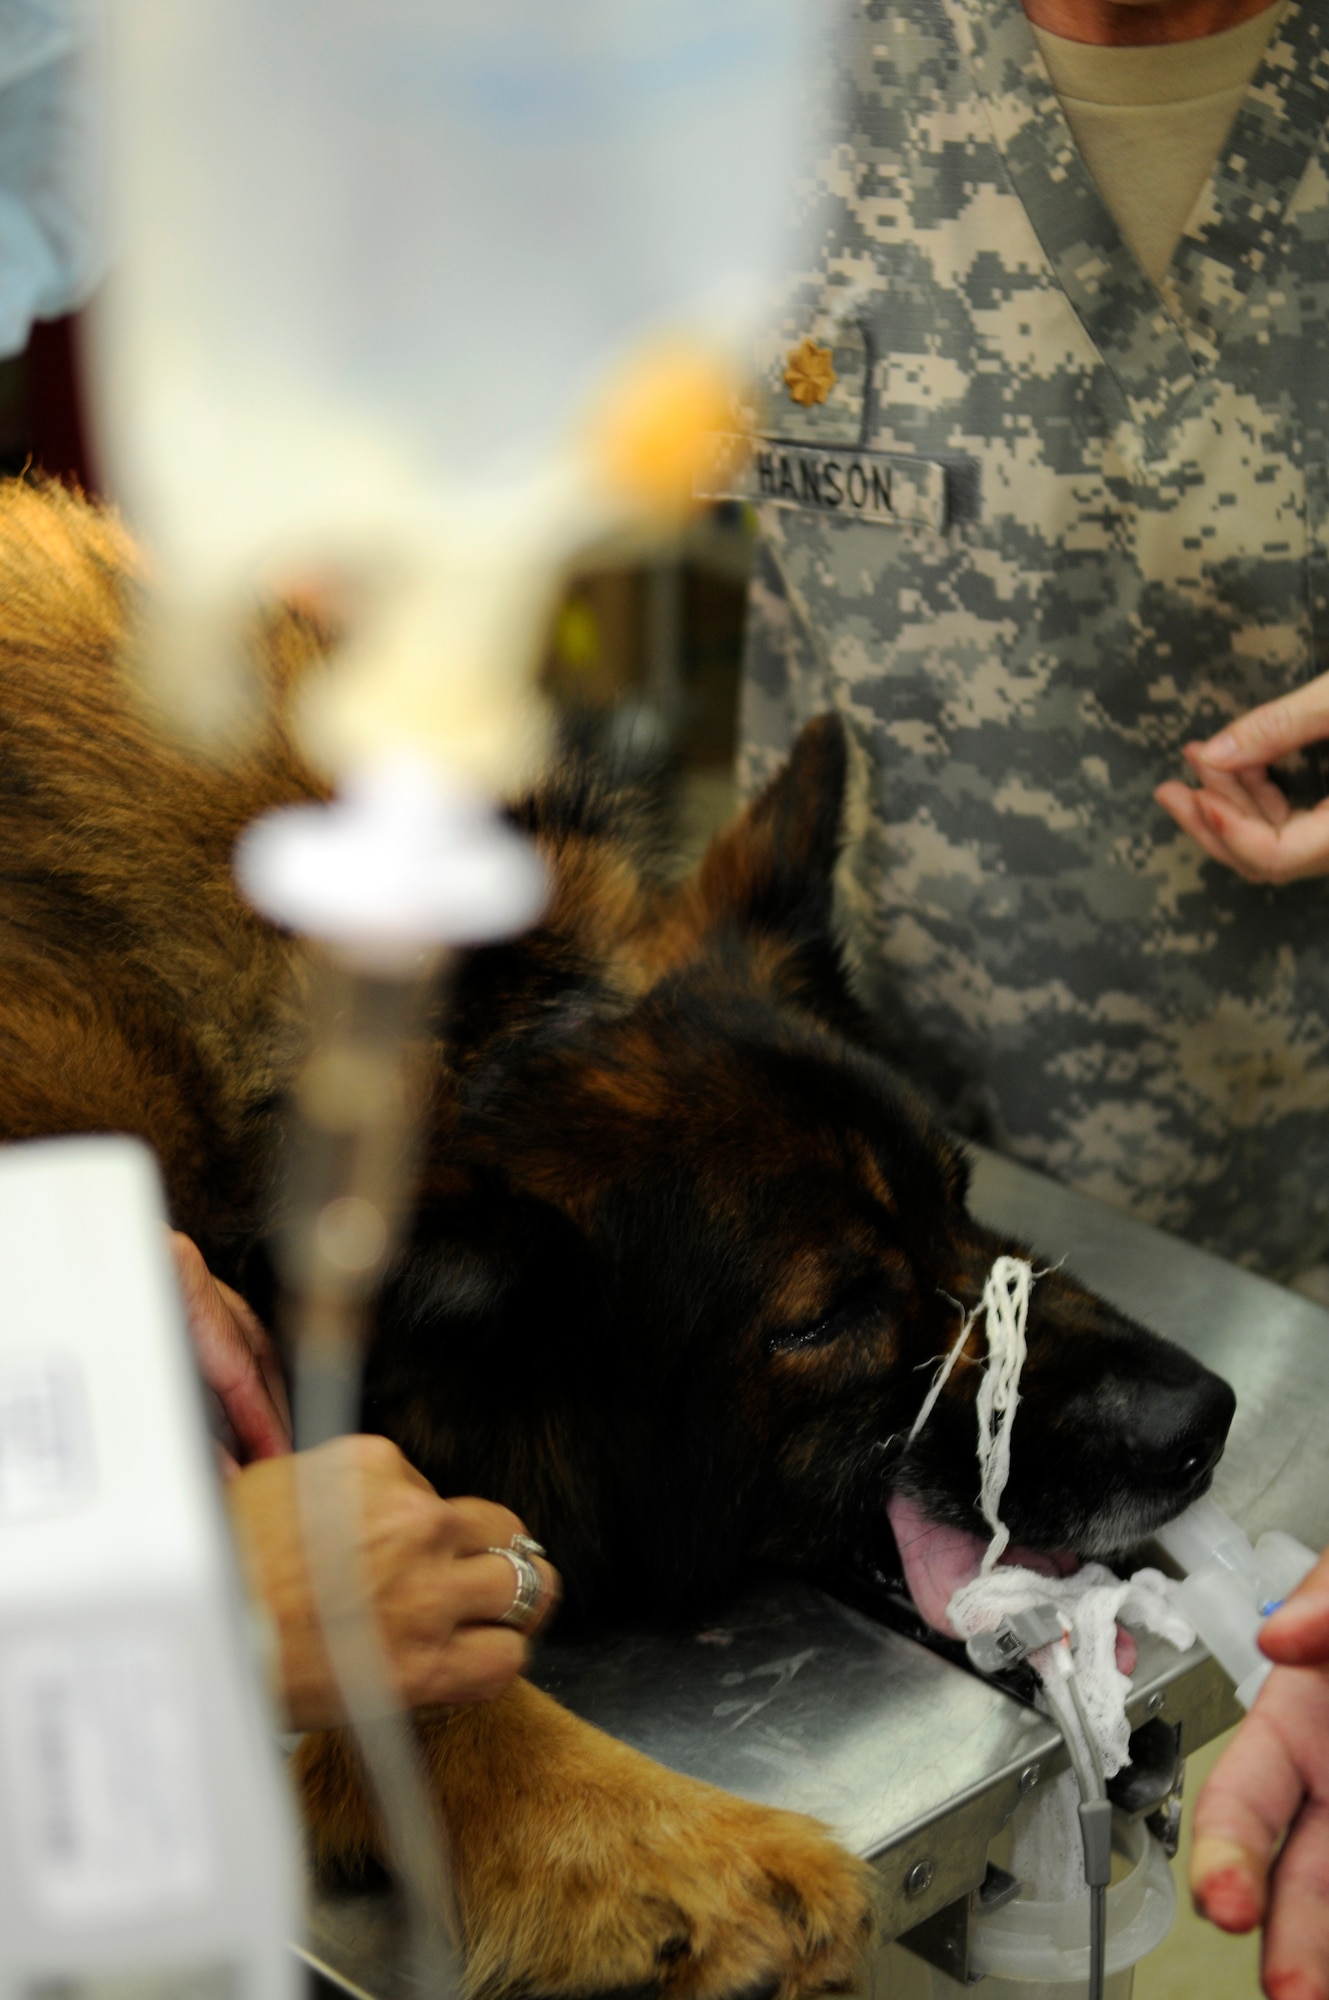 Suli, a 39th Security Forces Squadron military working dog, is almost ready for his prophylactic gastropexy, also referred to as stomach tacking, to prevent gastric torsion, or twisting of the stomach Thursday, Aug. 27, 2009 at the Veterinary Clinic, Incirlik Air Base, Turkey.  The surgery was completed after a recommendation by the Army, the service in charge of medical care for the military working dog program, for all dogs in the program to receive the surgery.  Stomach twisting is caused by gastric dilatation and volvulus, commonly known as bloat, the second leading killer of dogs after cancer.  (U.S. Air Force photo/Staff Sgt. Raymond Hoy)